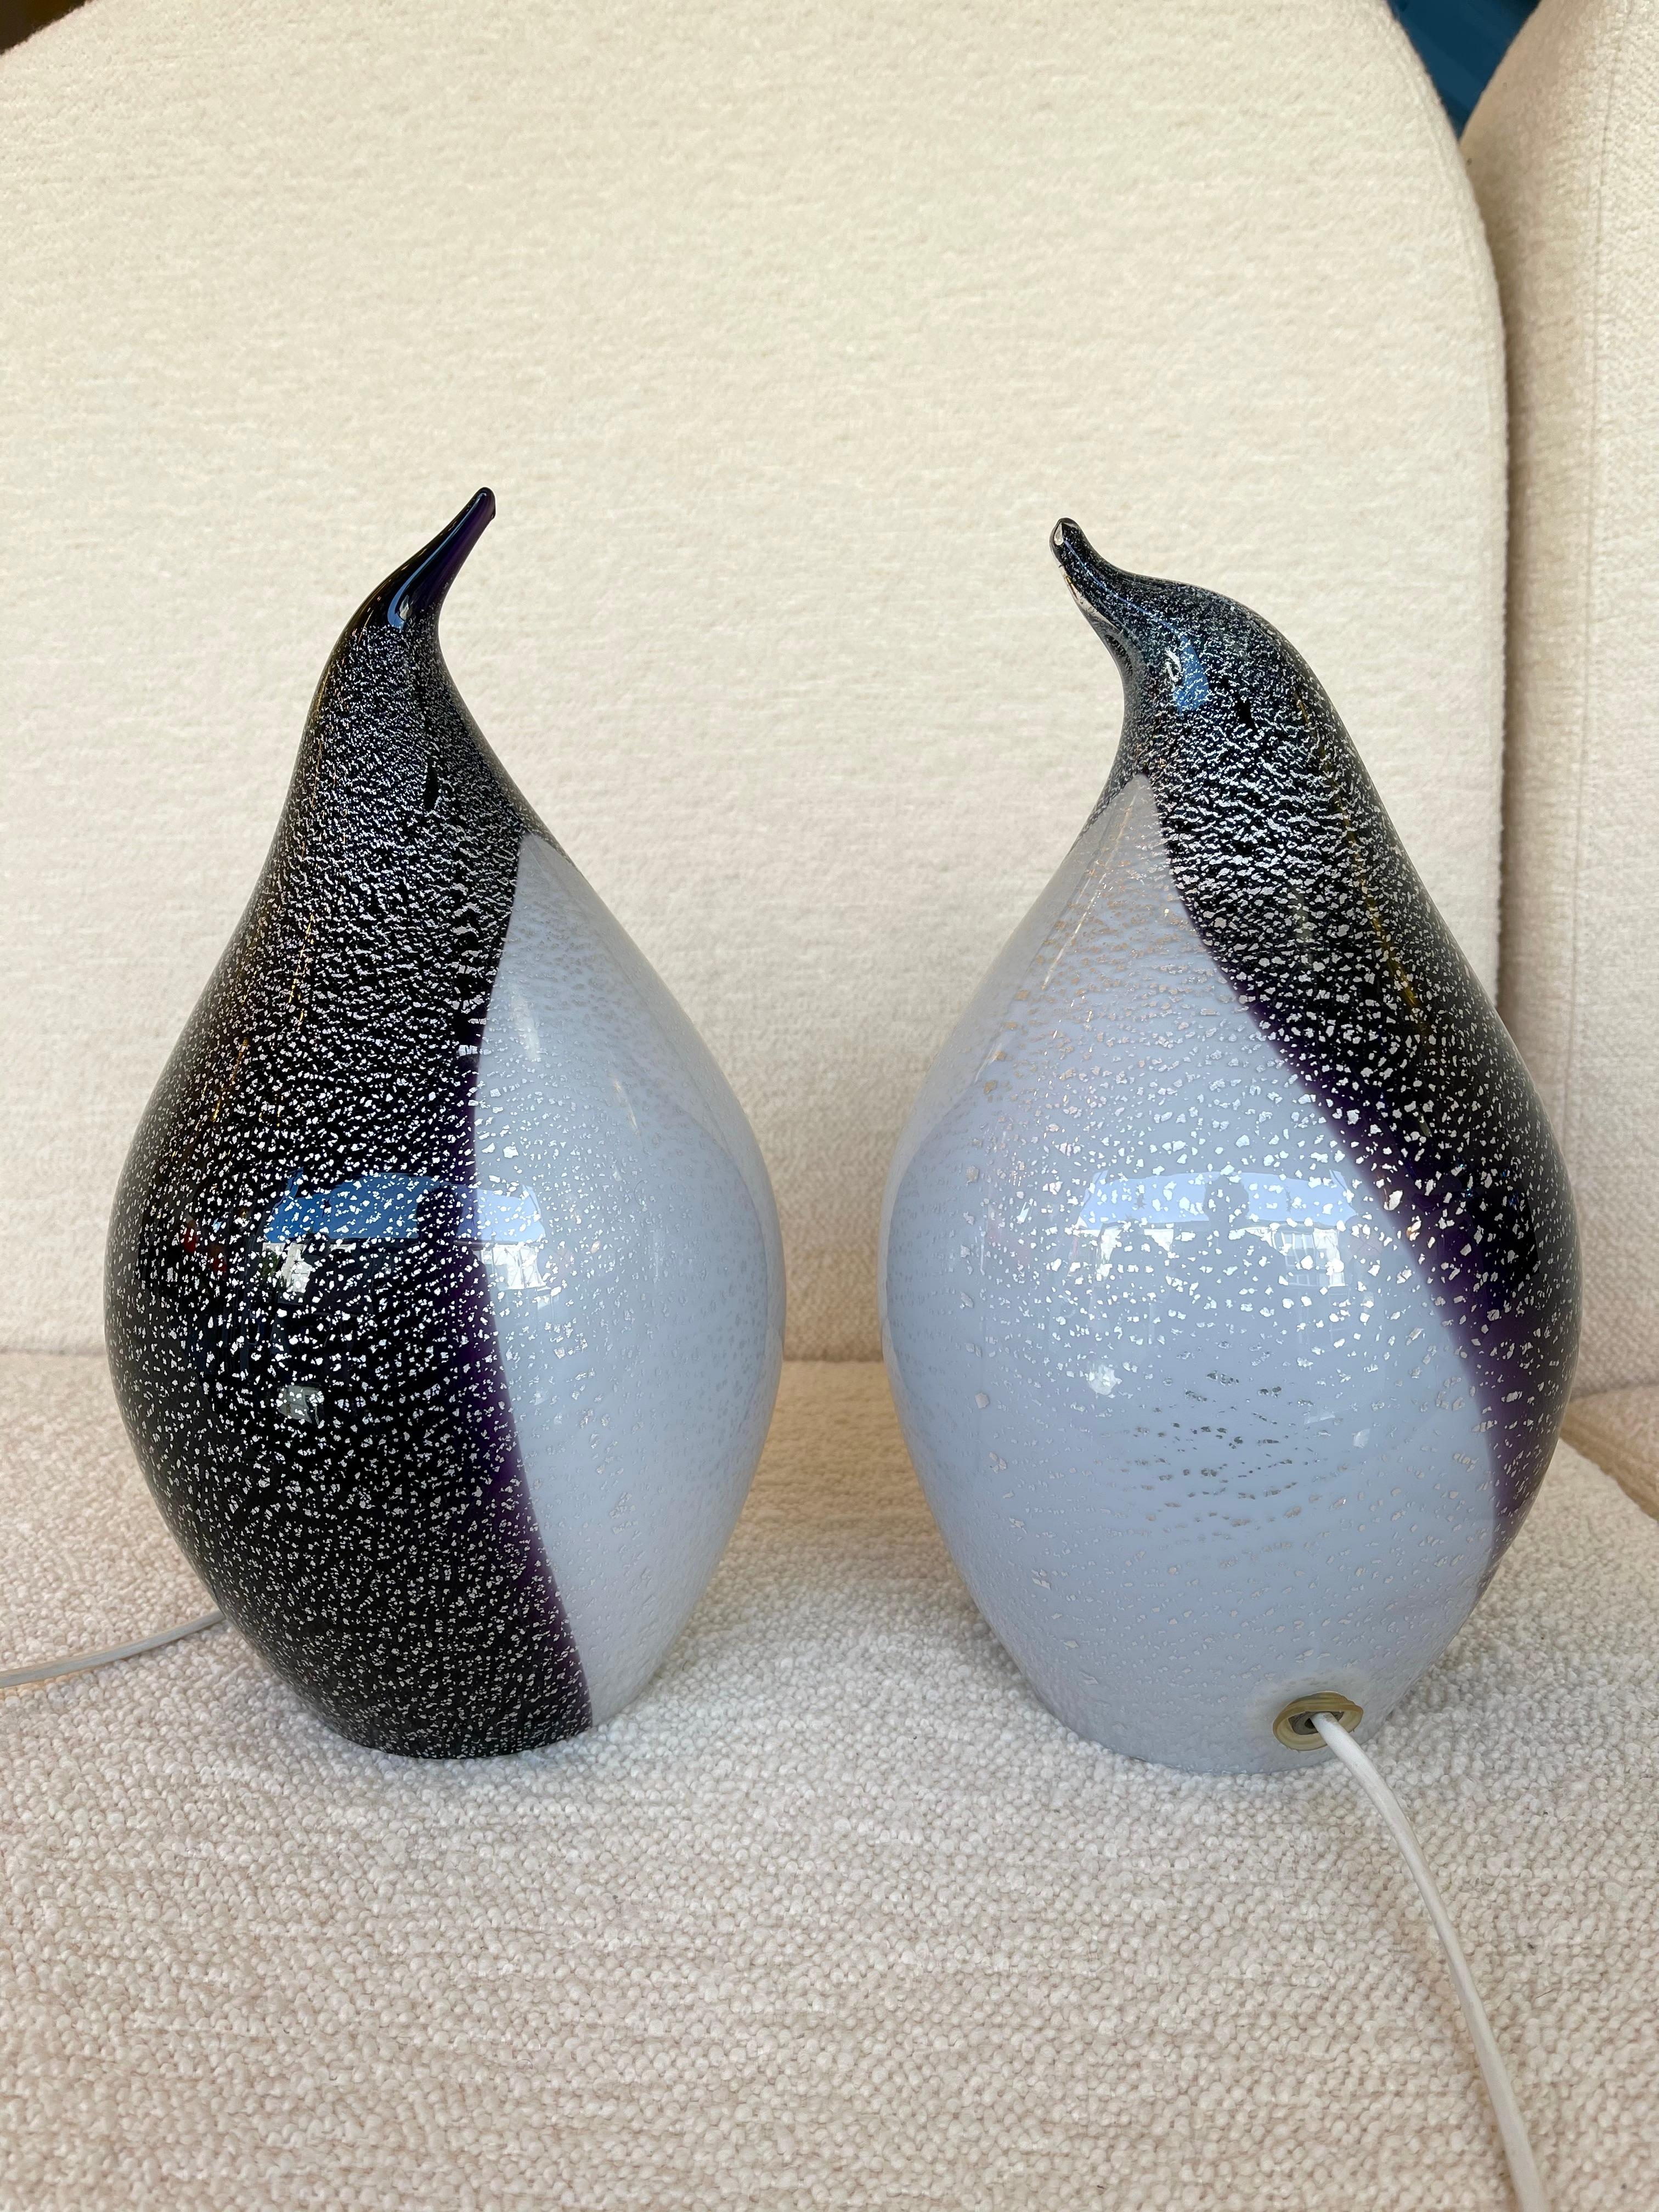 Pair of Penguin Murano Glass Lamps, Italy, 1980s For Sale 7